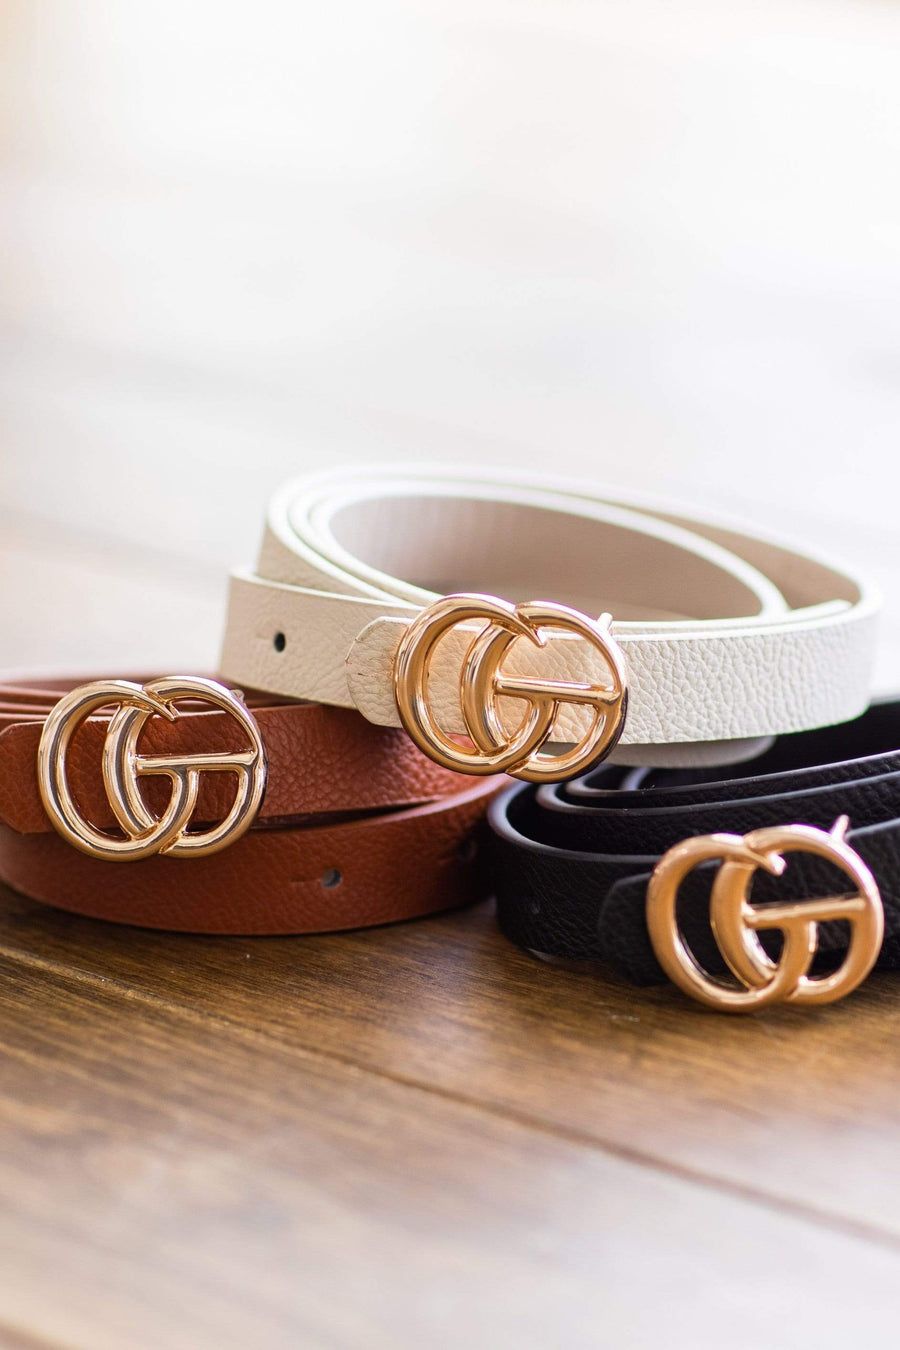 Luxurious Style: Gucci Belts for Every Occasion